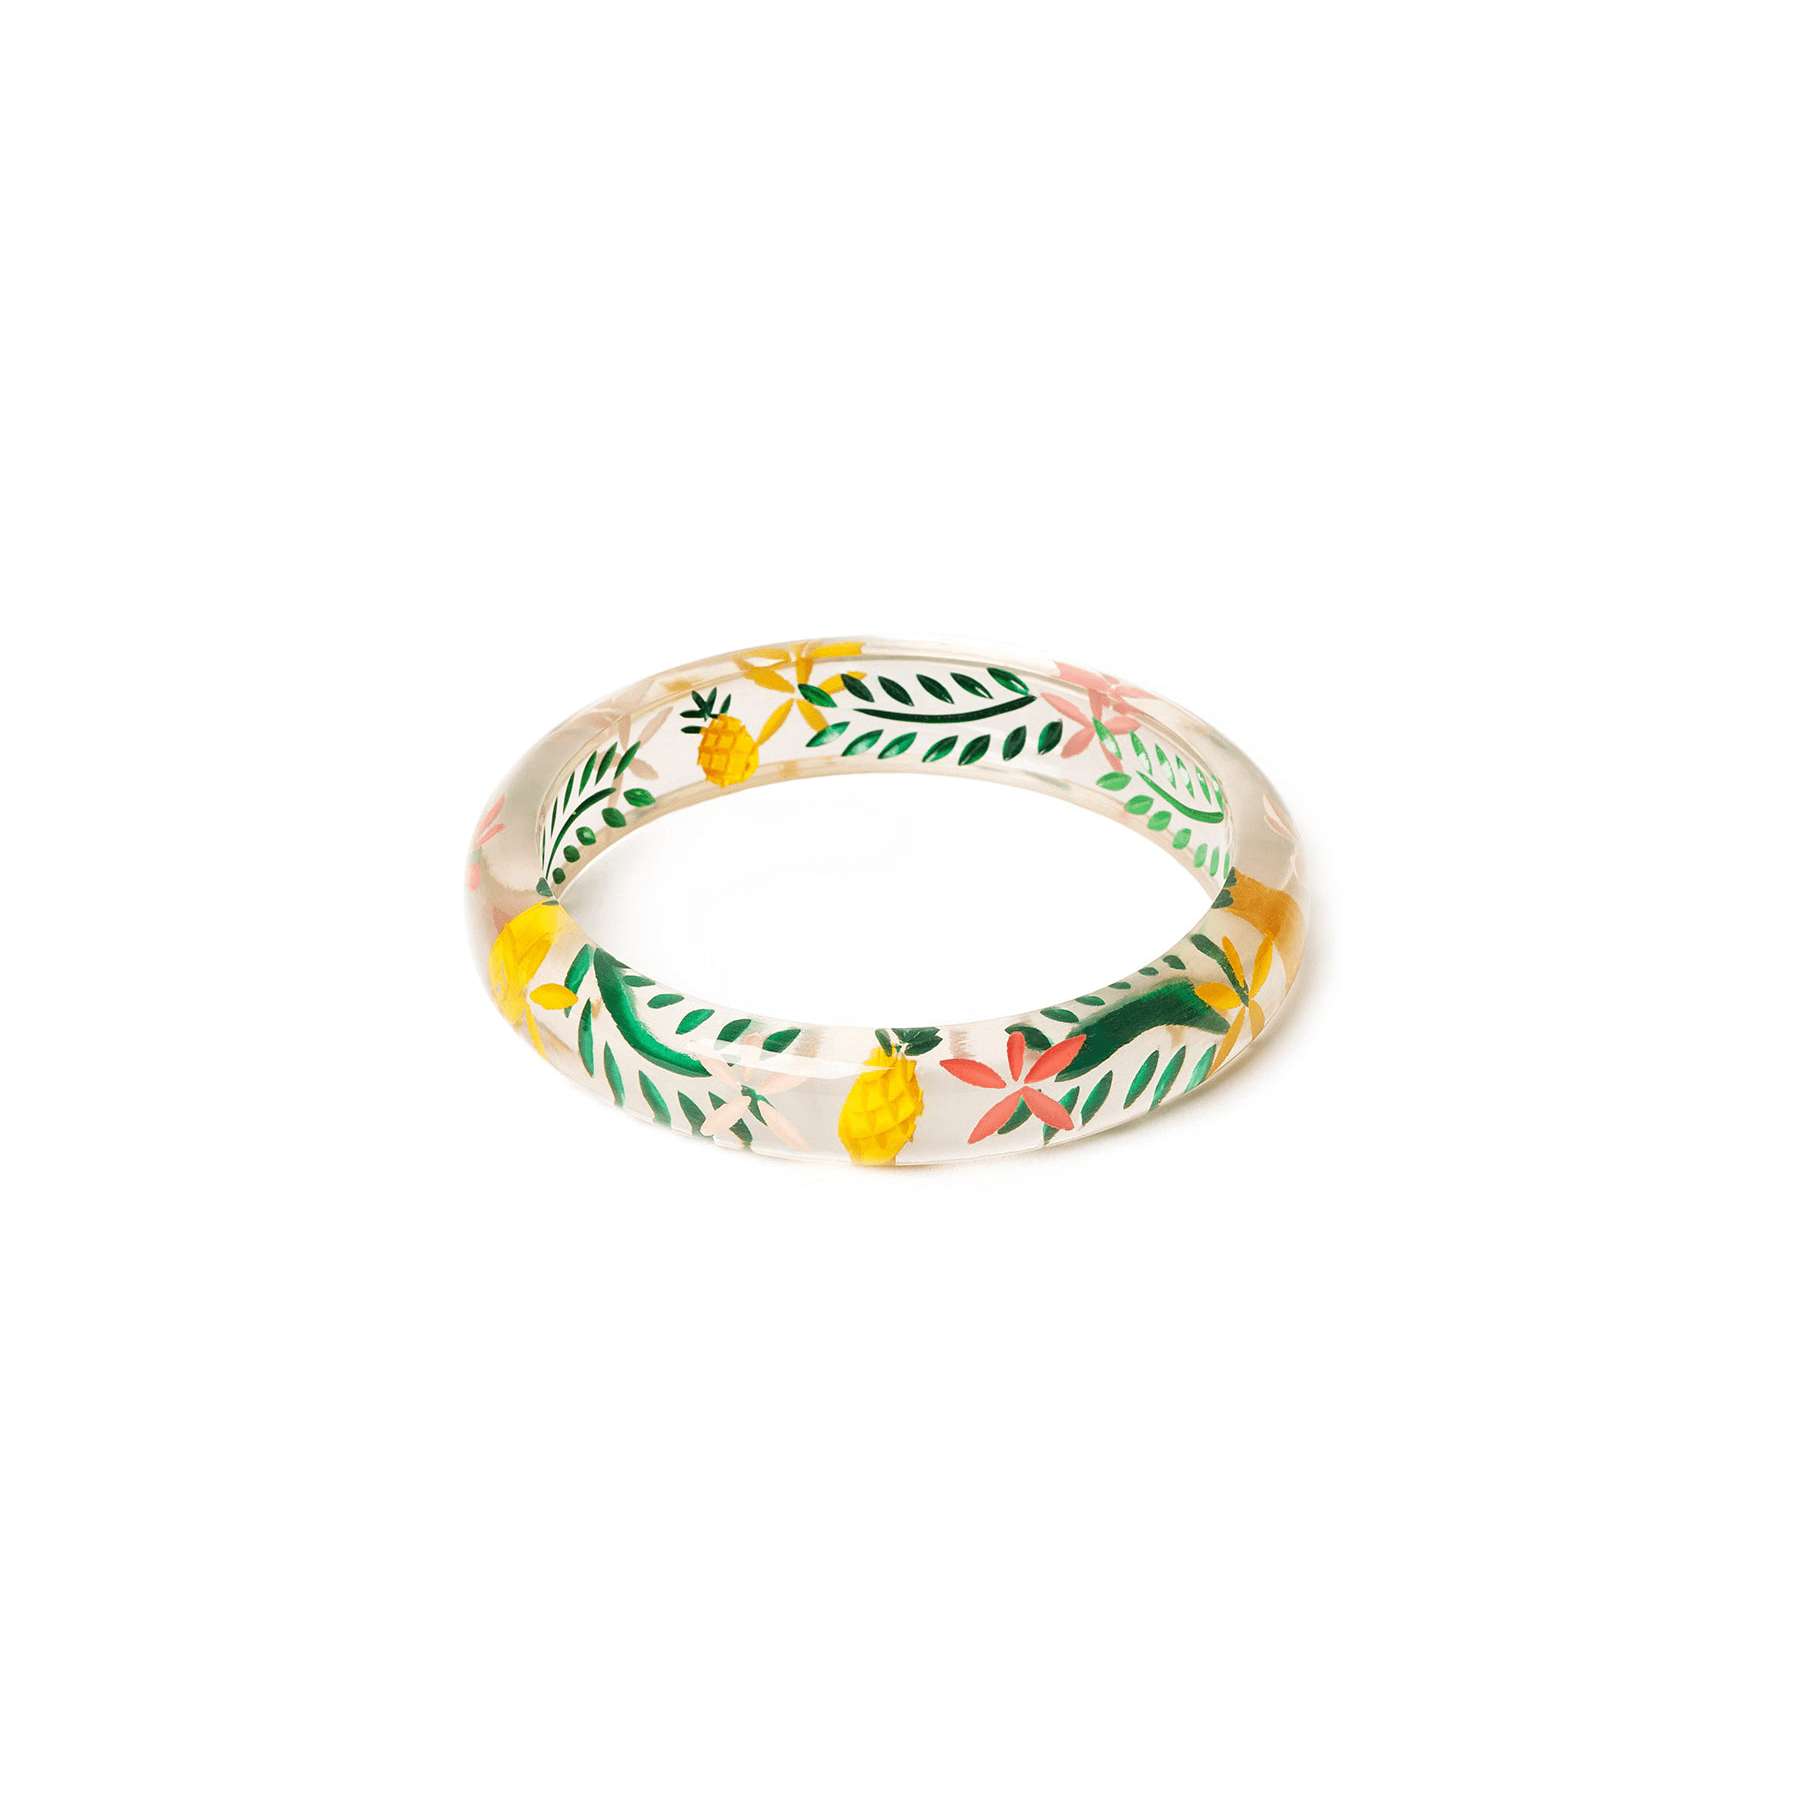 MIDI PINEAPPLE CLEAR BANGLE - DUCHESS FIT - The Proper Pinup